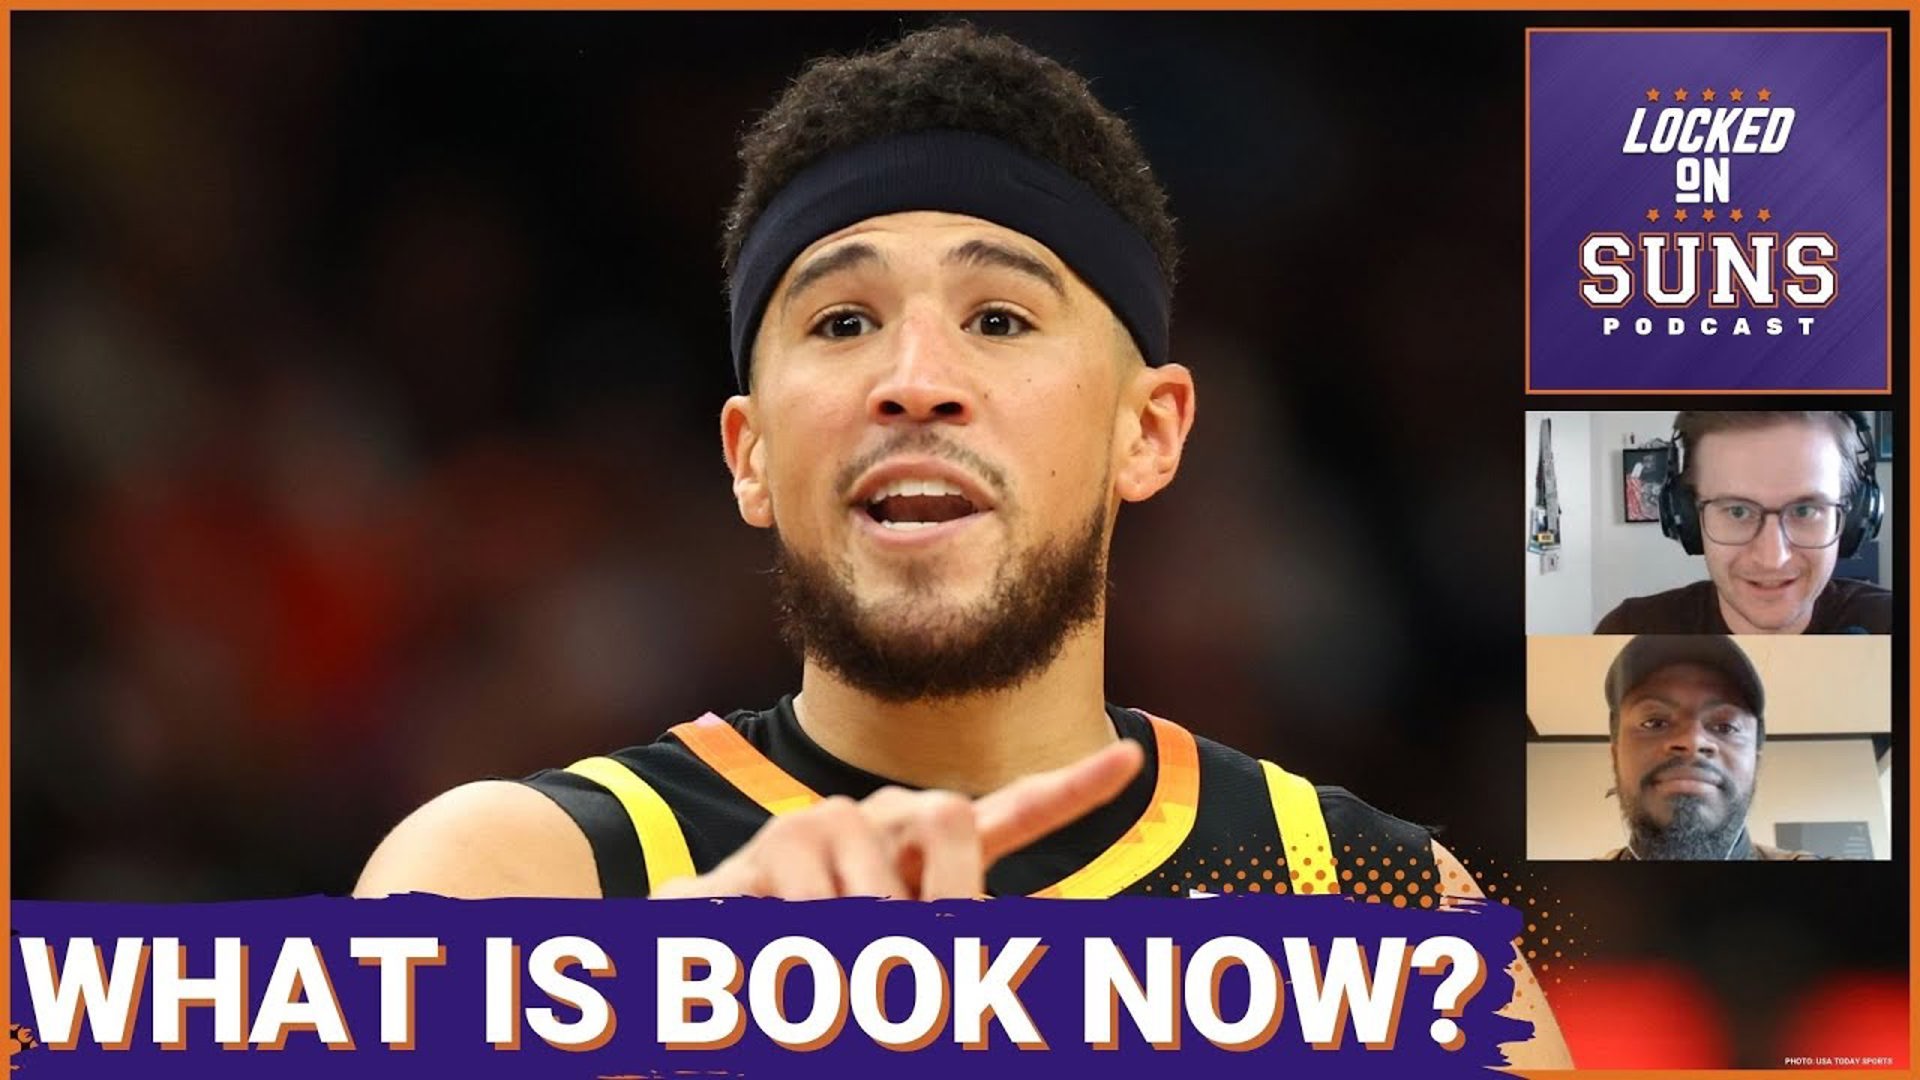 Devin Booker had maybe his best season with the Phoenix Suns and is likely to get All-NBA honors, but the season ended in disappointment.